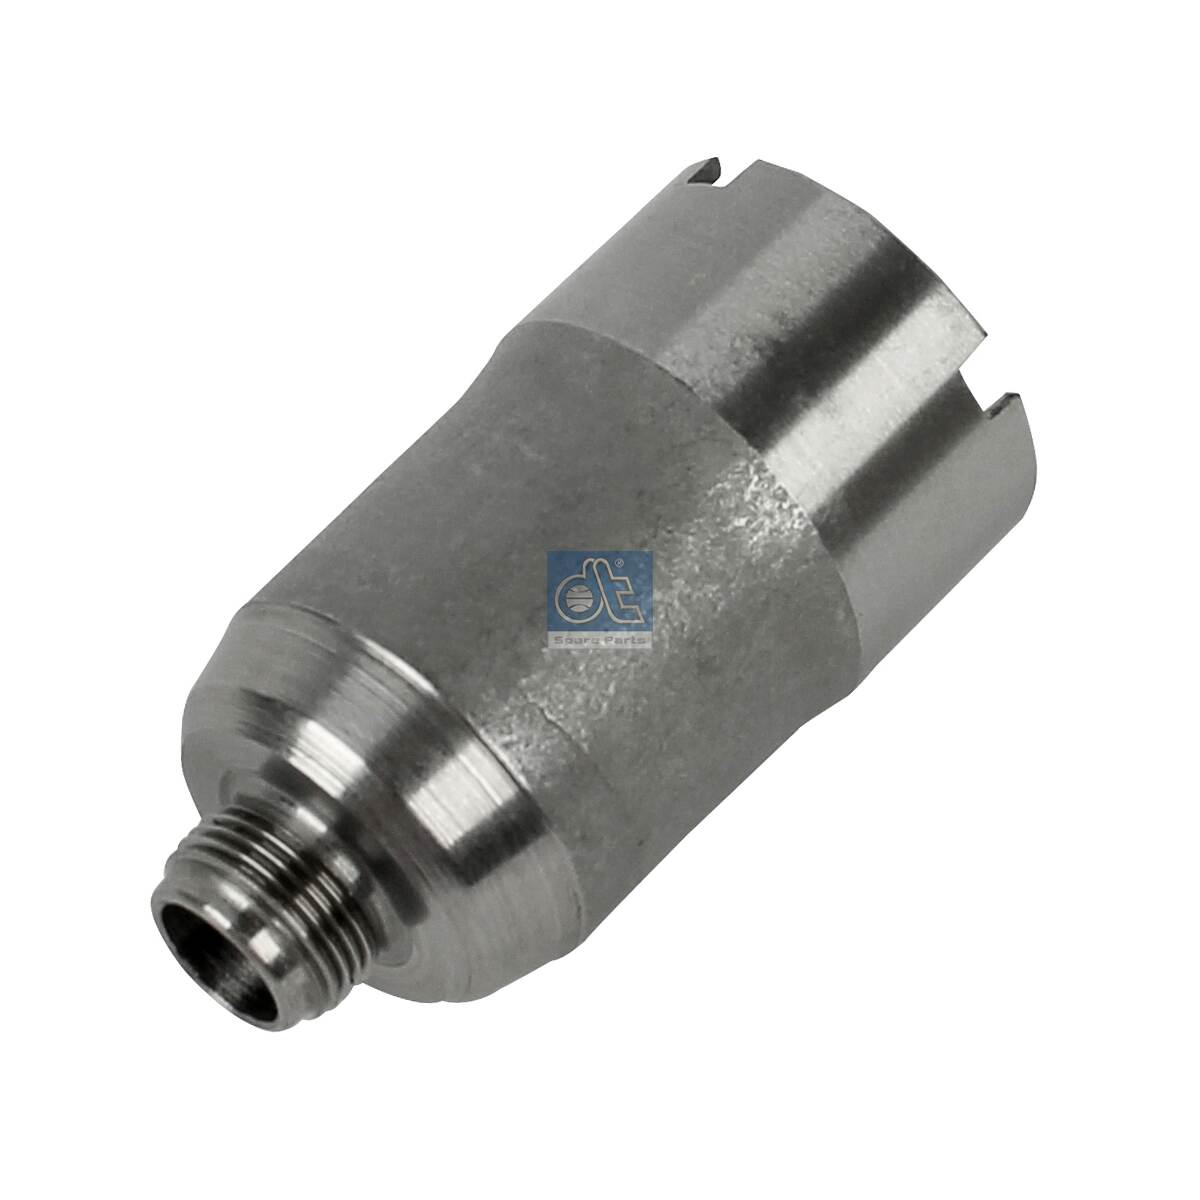 4.50093, Sleeve, nozzle holder, DT Spare Parts, 3520170053, A3520170053, 010.1174, 010124300000, 01.10.001, 102910, 14274, 171619, 20010335250, 20.0103.35250, 4.50093MG/41851, 450093